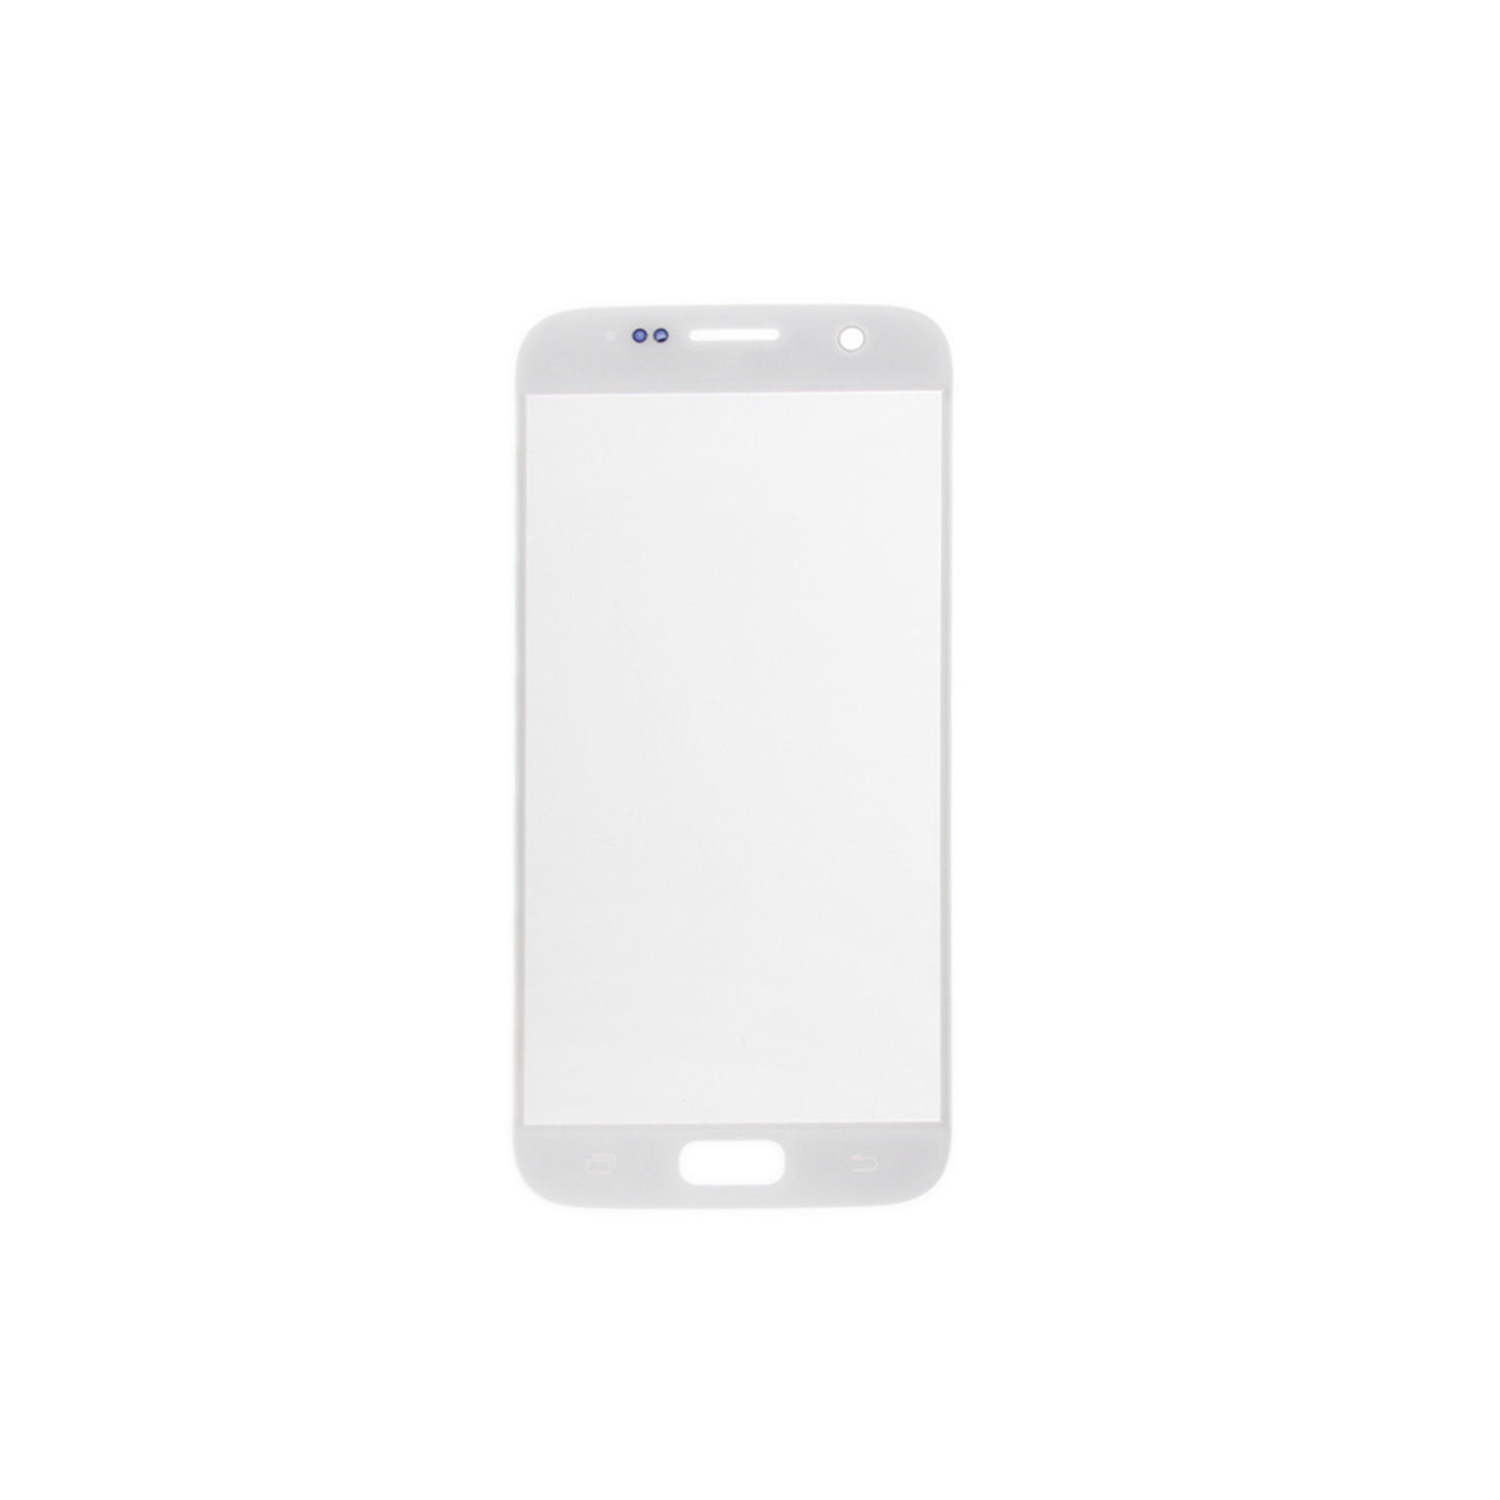 Samsung Galaxy S7 G930/G930F/G930A/G930V/G930P/G930T/G930R4/G930W8 Glass Lens Replacement - White